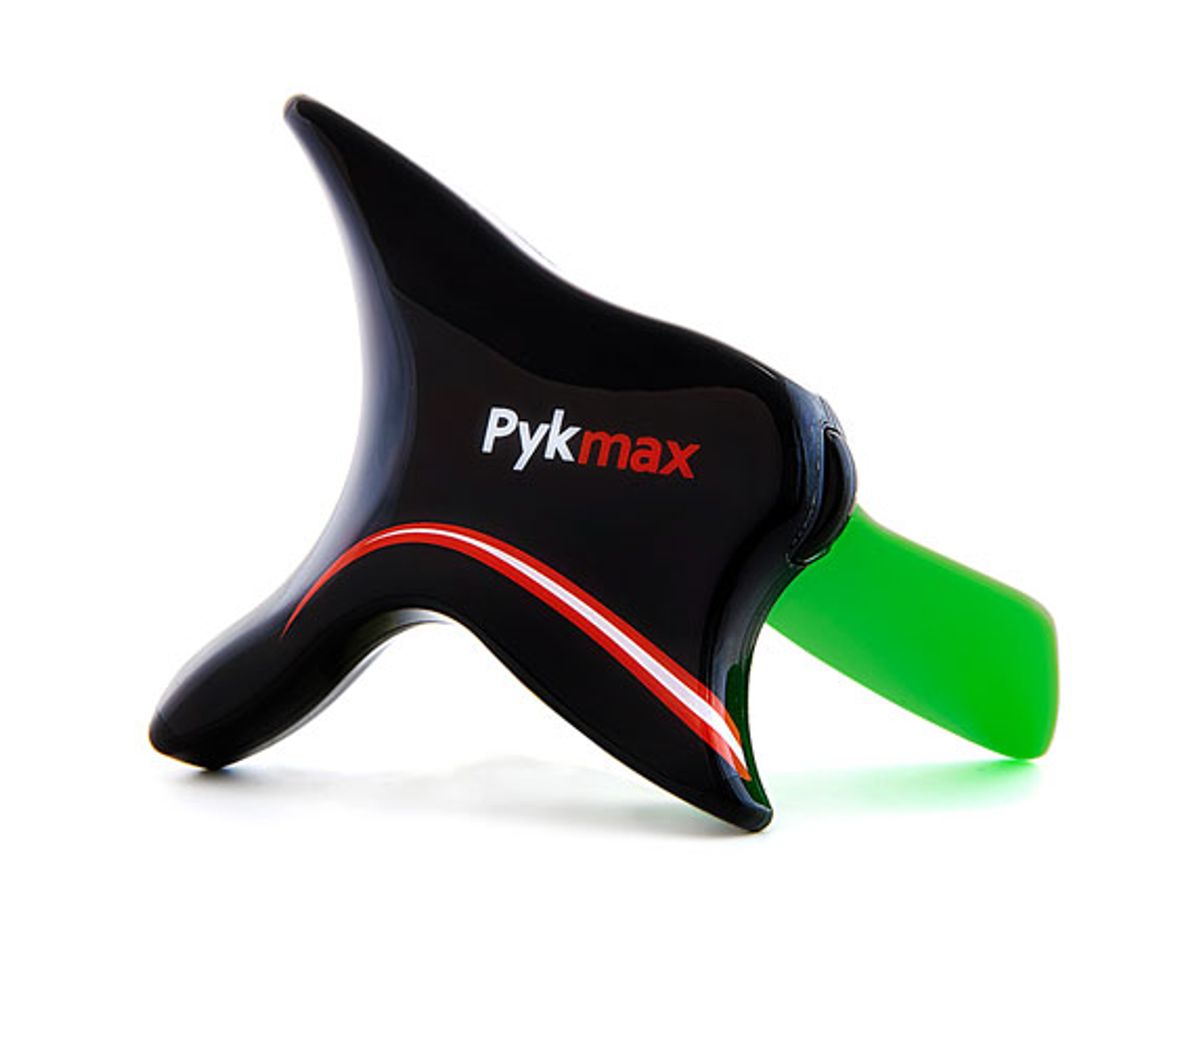 Pykmax Releases J Series Picks